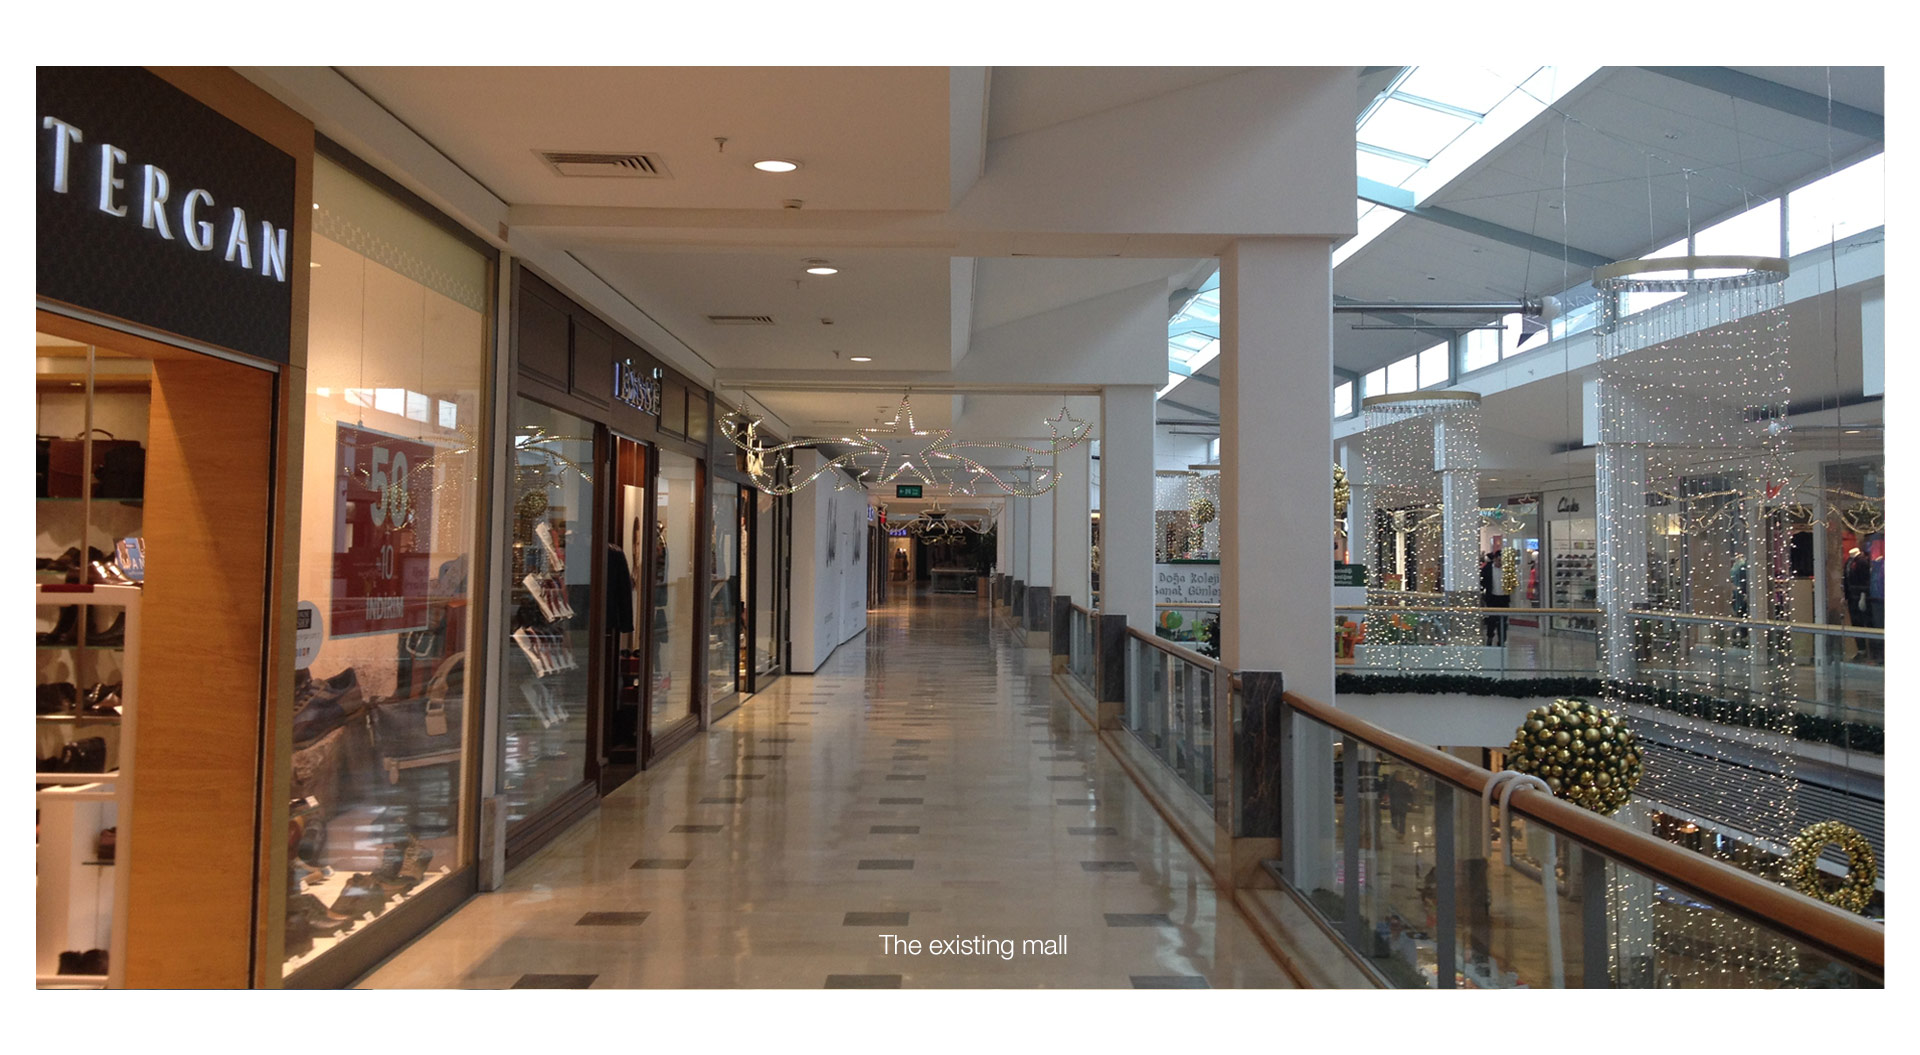 Icerenkoy shopping mall Istanbul interior design of existing mall